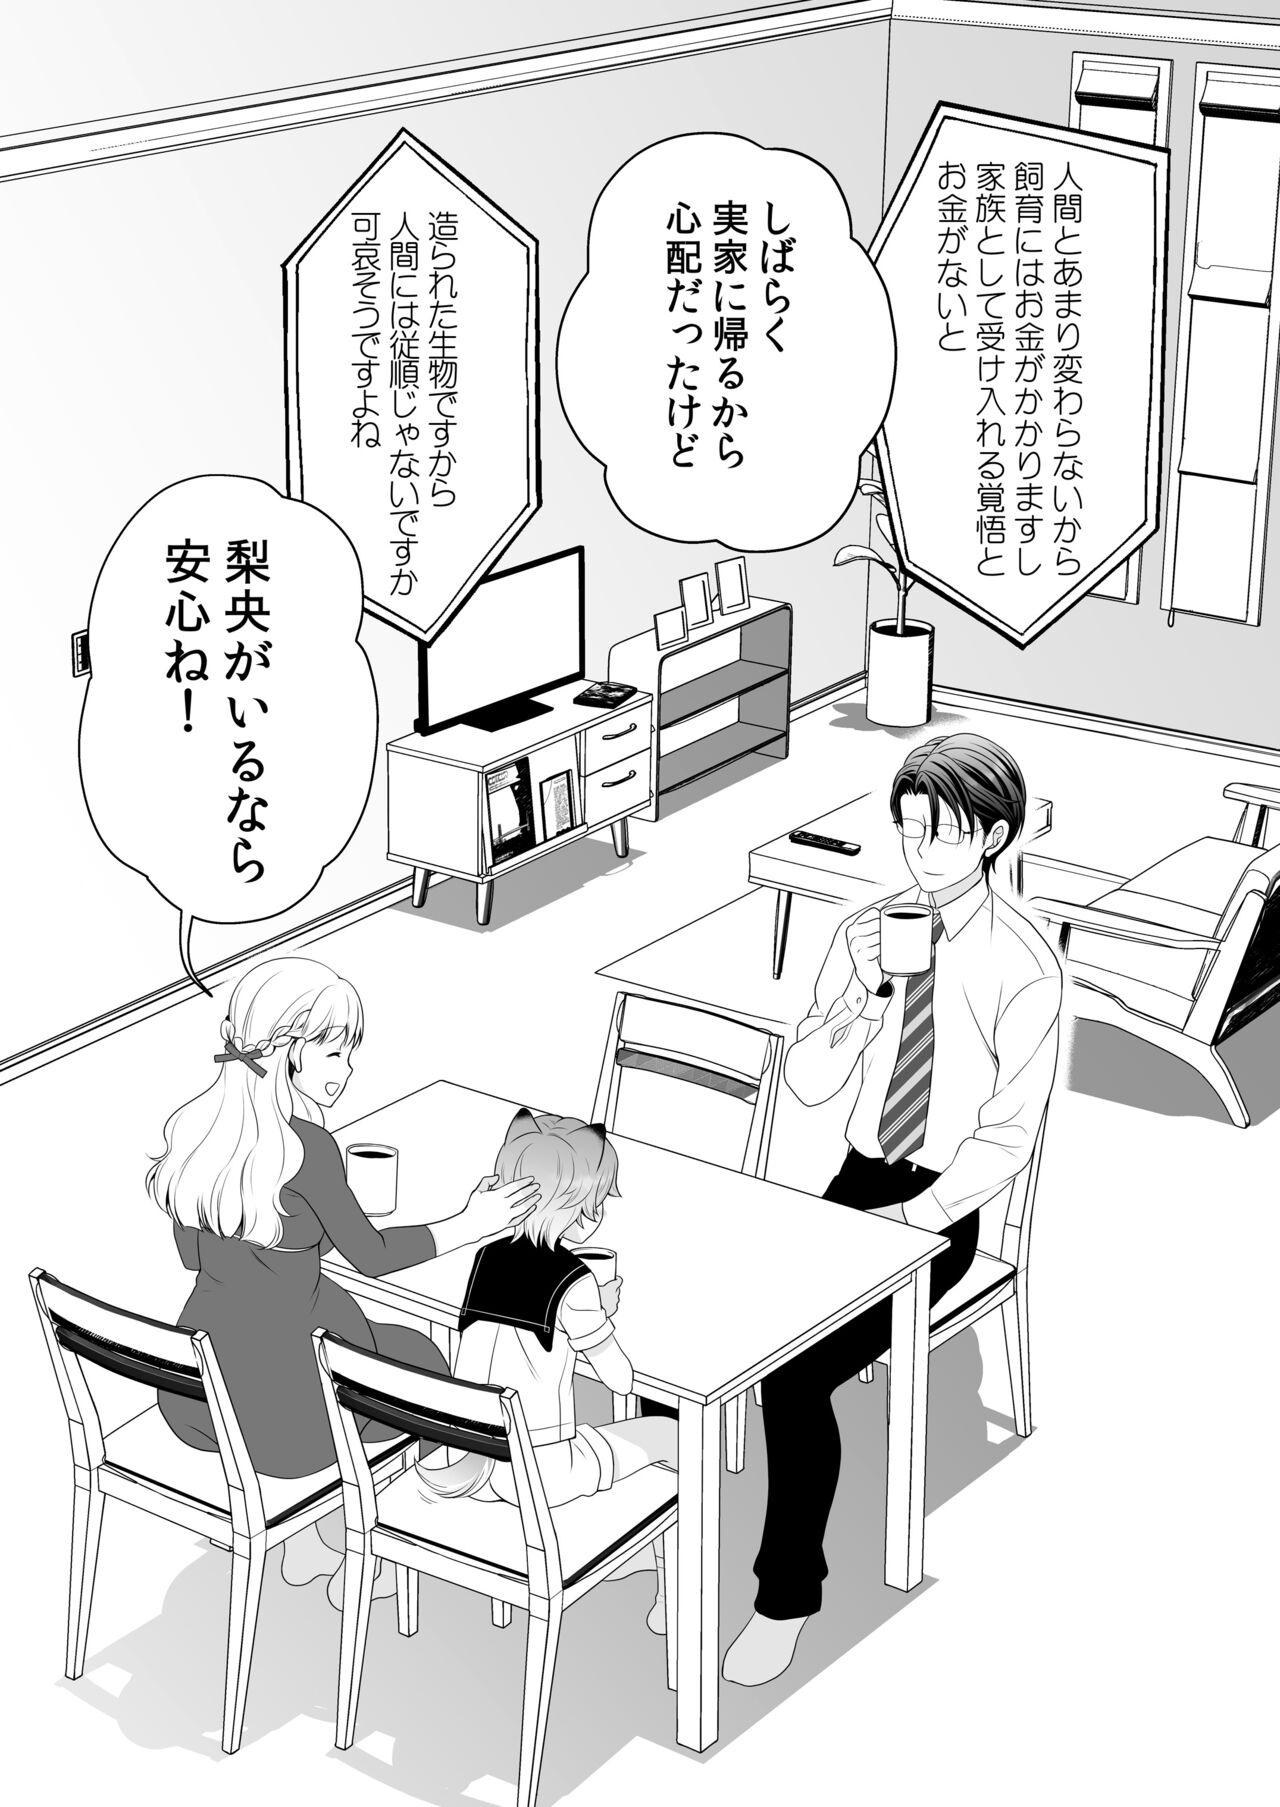 Suck Aigan Juujin Side Rio - I Want to Be Loved by You. - Original Office Sex - Page 5